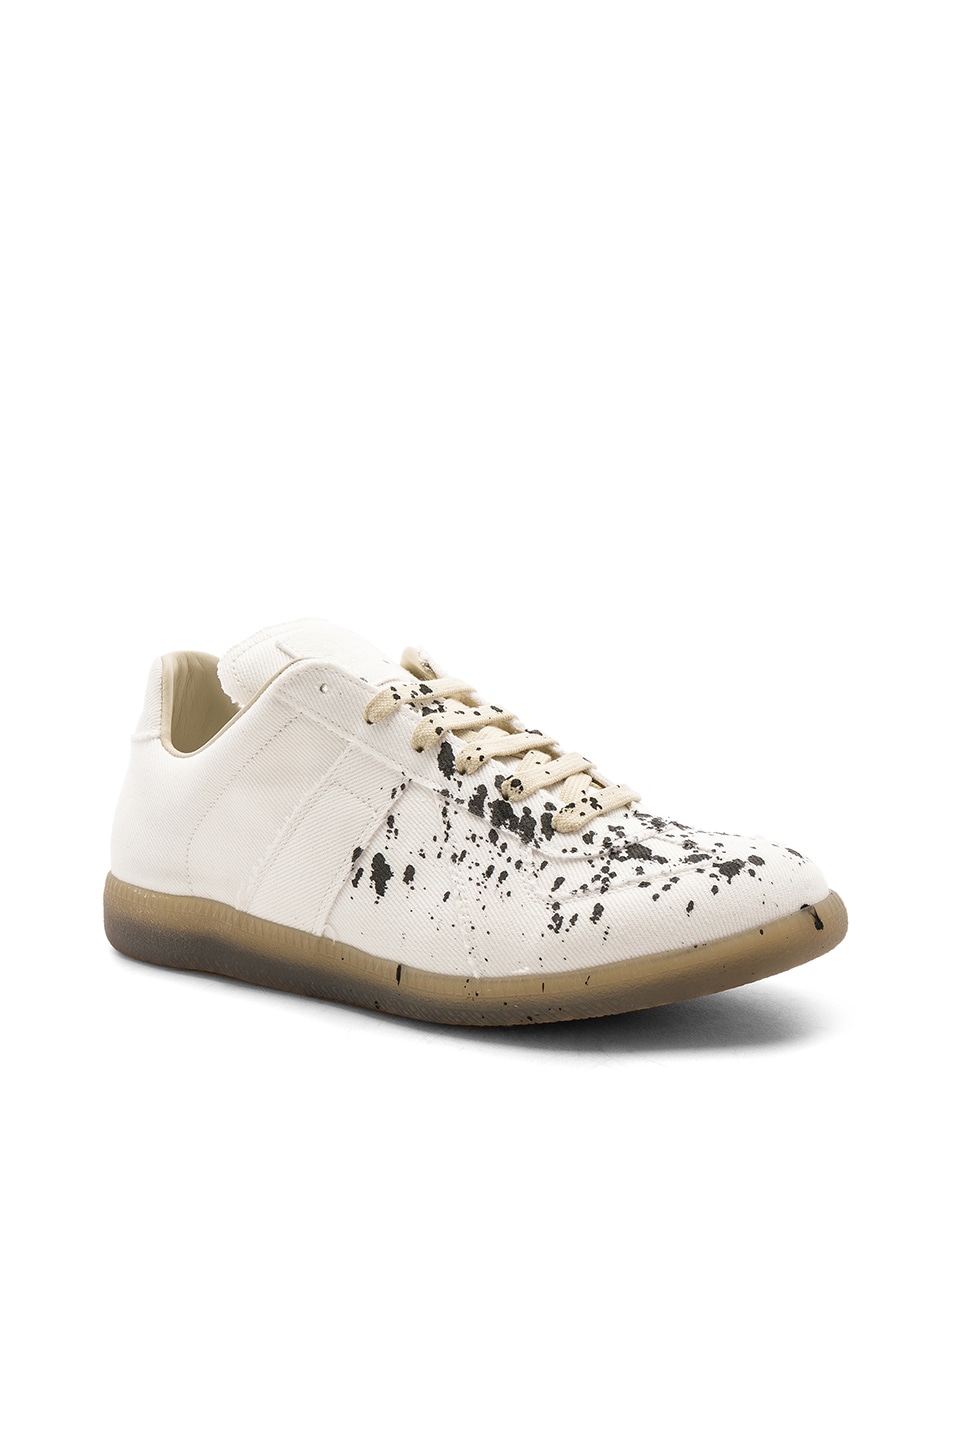 Image 1 of Maison Margiela Replica Painter Sneakers in White in White & Black